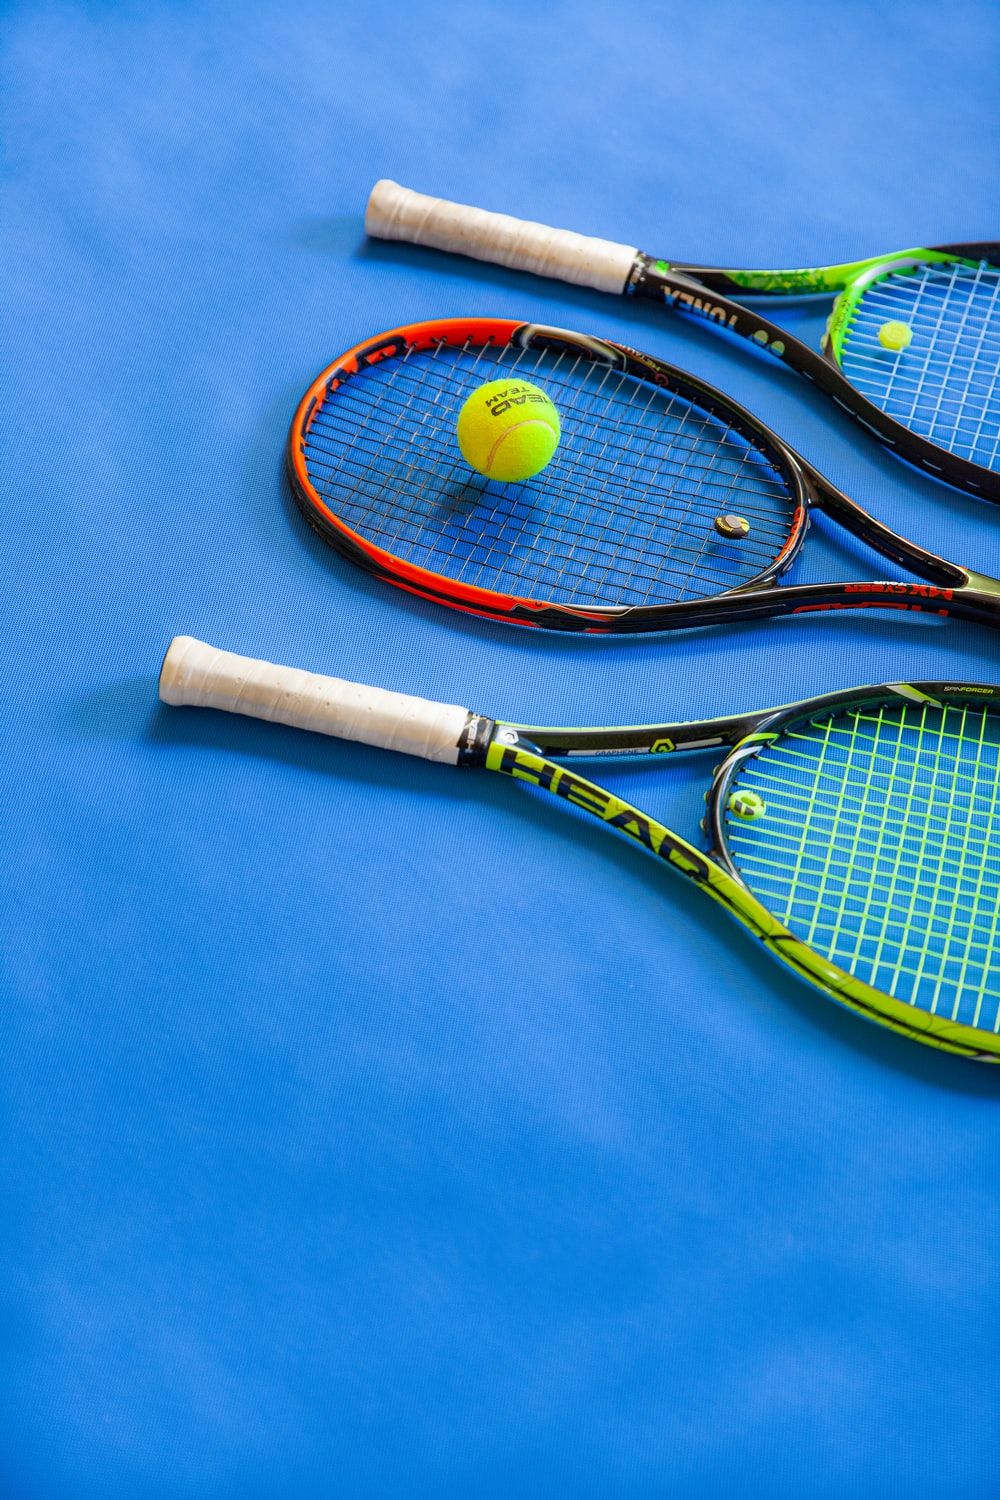 A tennis racket and ball on blue surface - Tennis